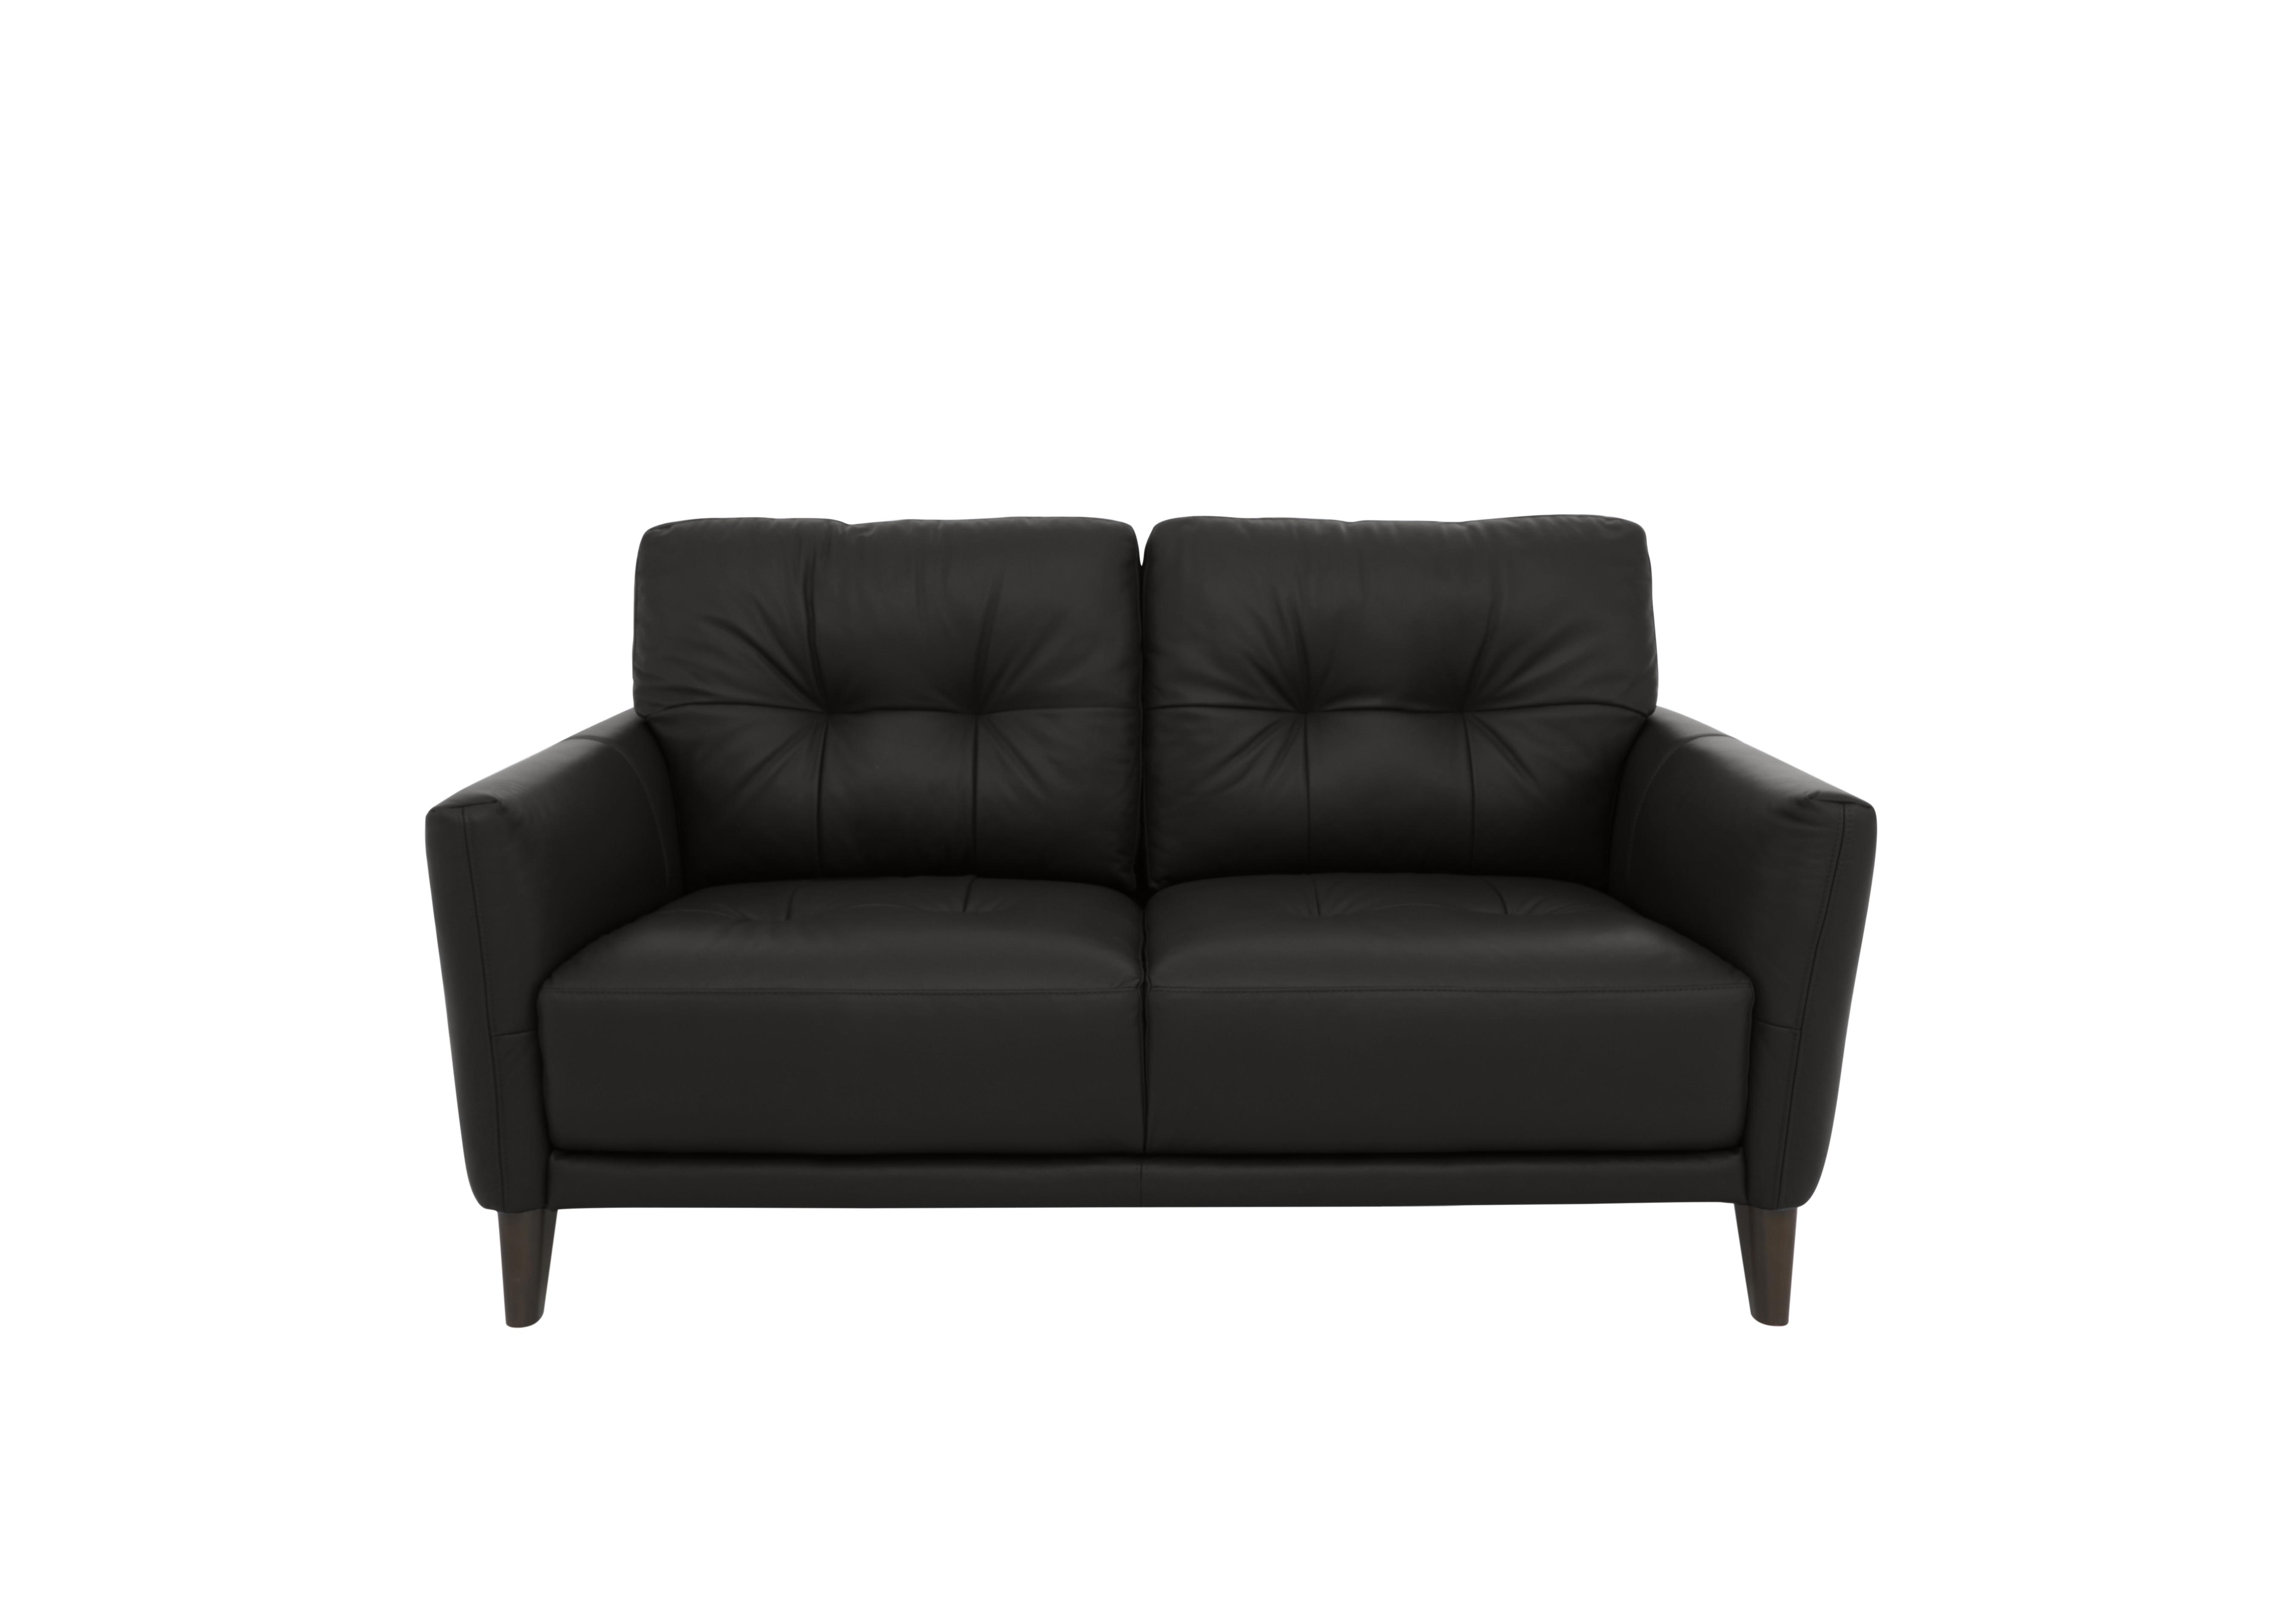 Uno Leather 2 Seater Sofa in Bv-3500 Classic Black on Furniture Village